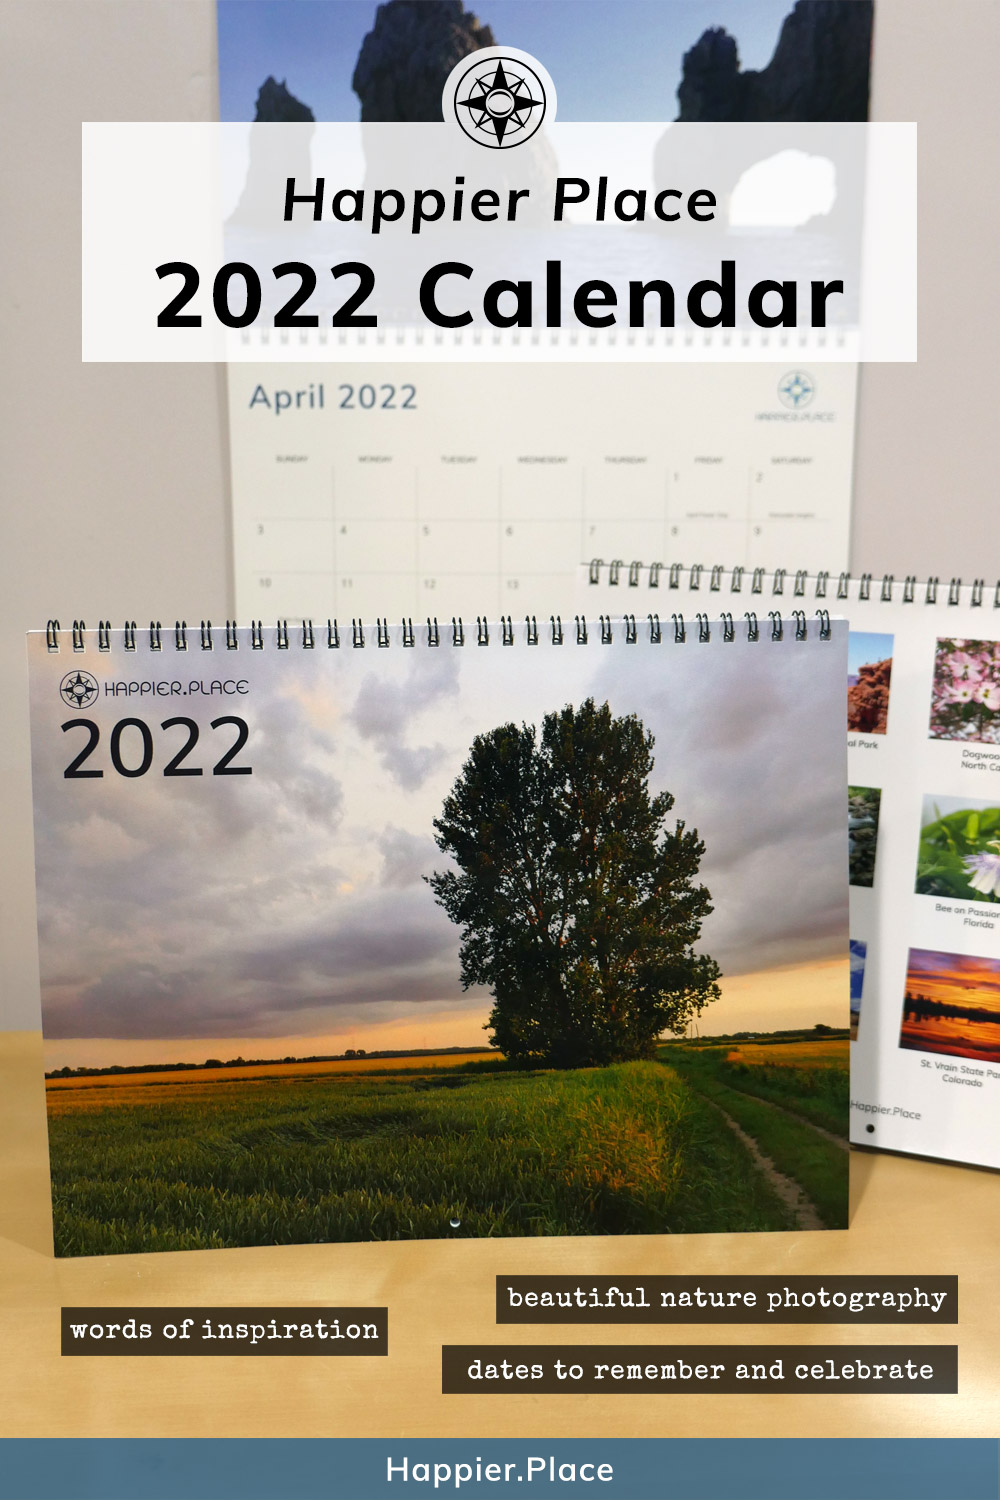 2022 Happier Place Calendar, Nature Photography Wall Calendar features beautiful nature photography, words of inspiration and dates to remember and celebrate